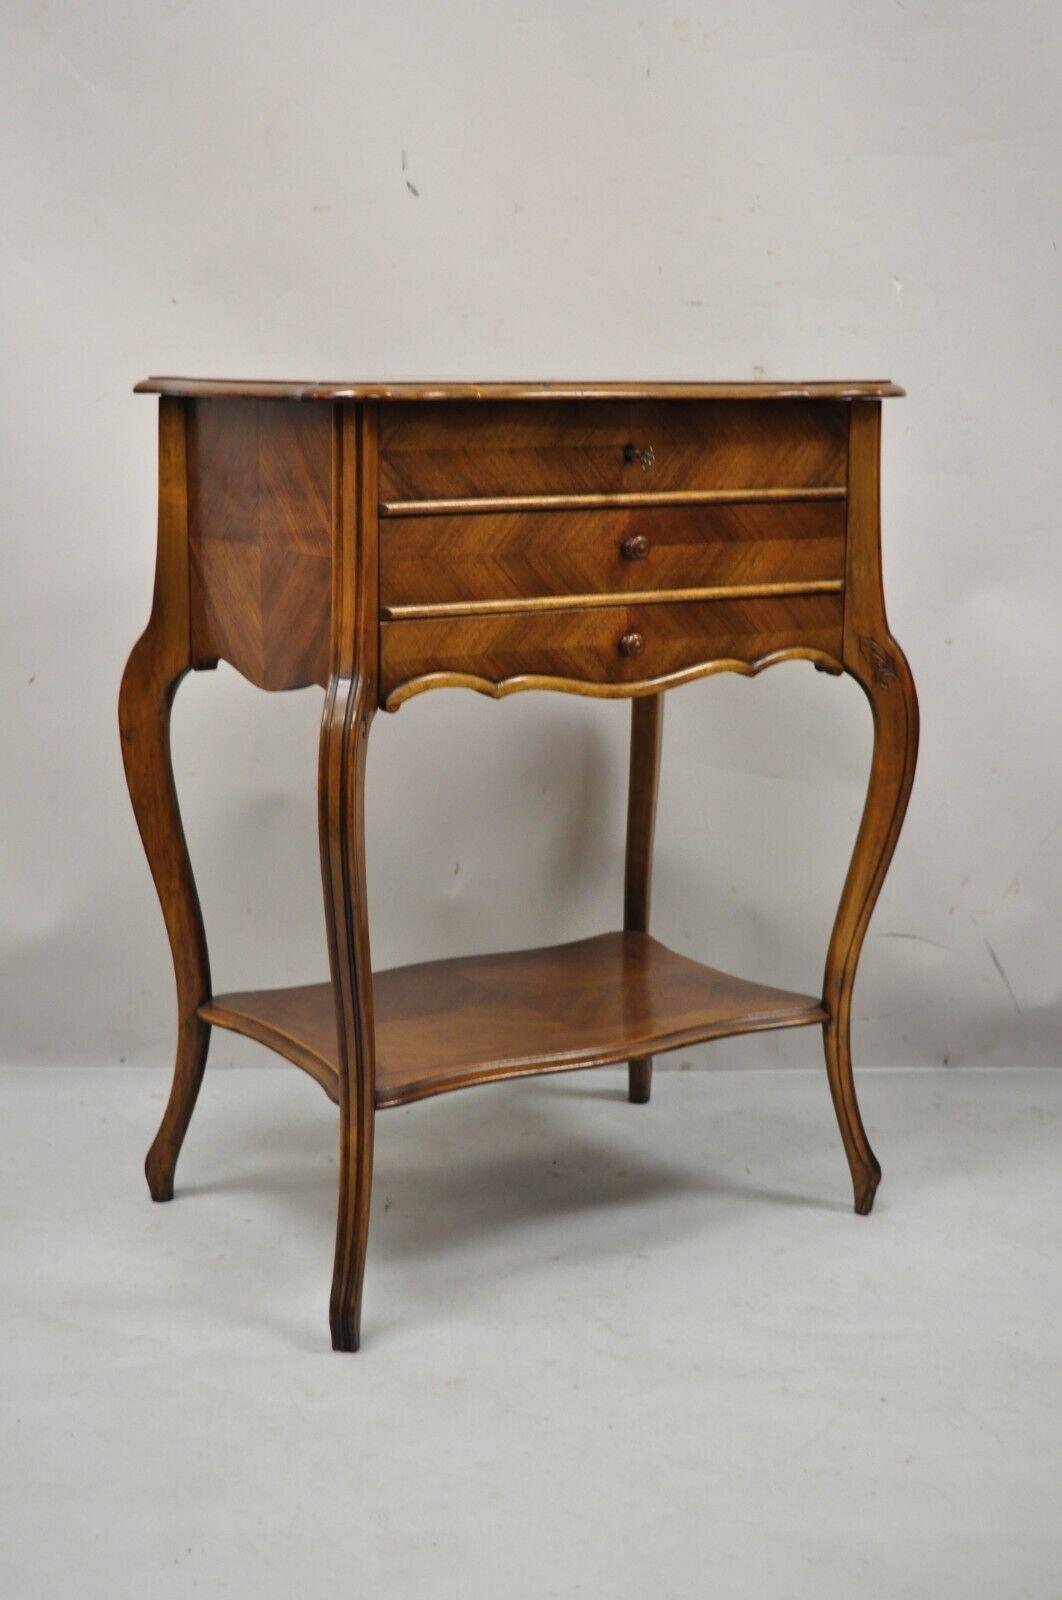 Antique French Louis XV style Mahogany sewing stand nightstand with lift top. Item features marquetry inlay lift up lid, beveled glass mirror, interior with compartments, beautiful wood grain, working lock and key, cabriole legs. Circa Early 1900s.